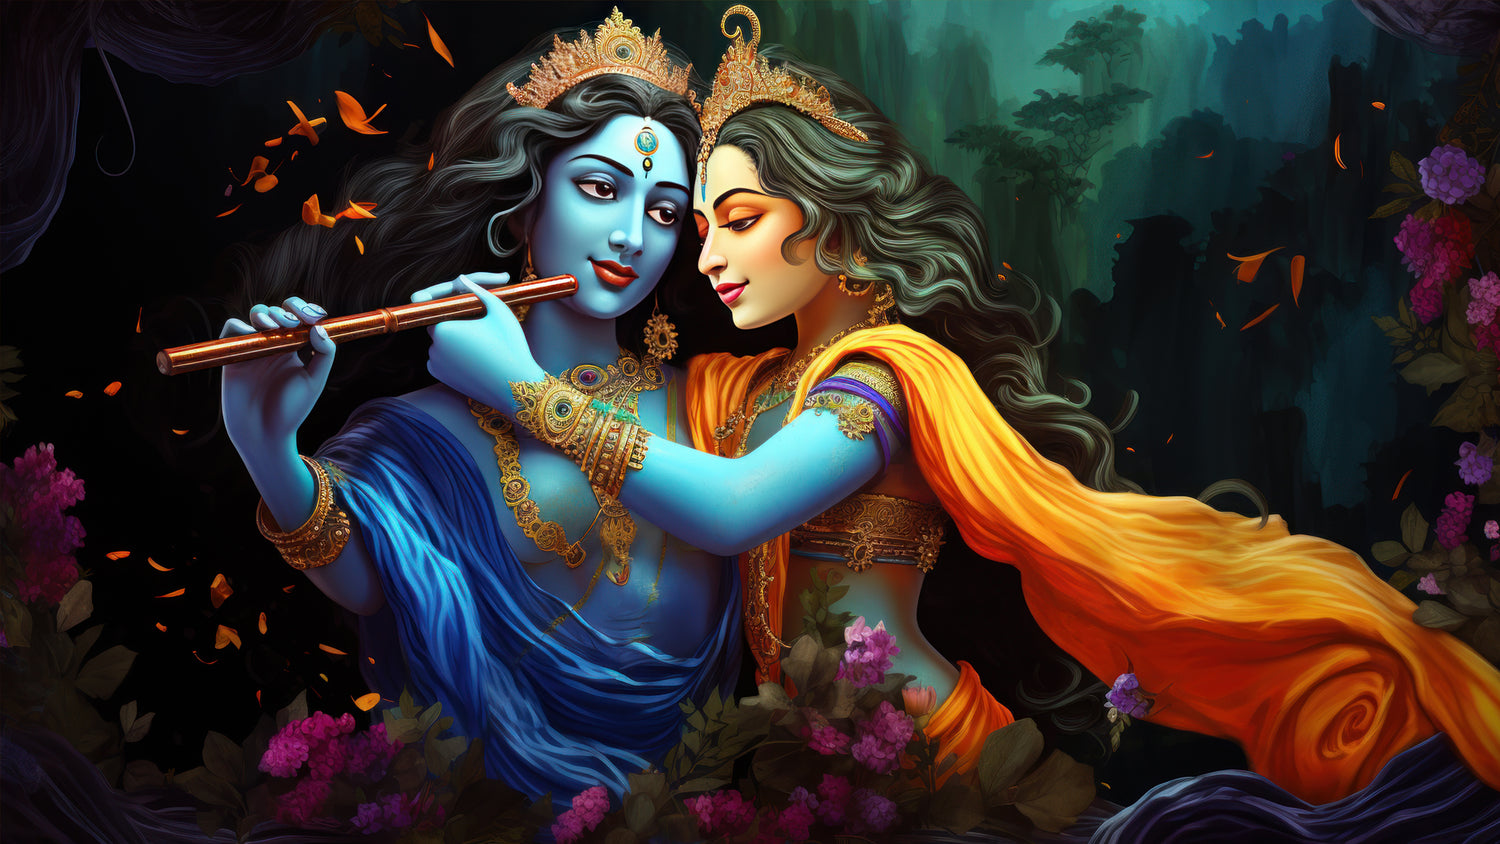 How Many Wife of Krishna Were There?